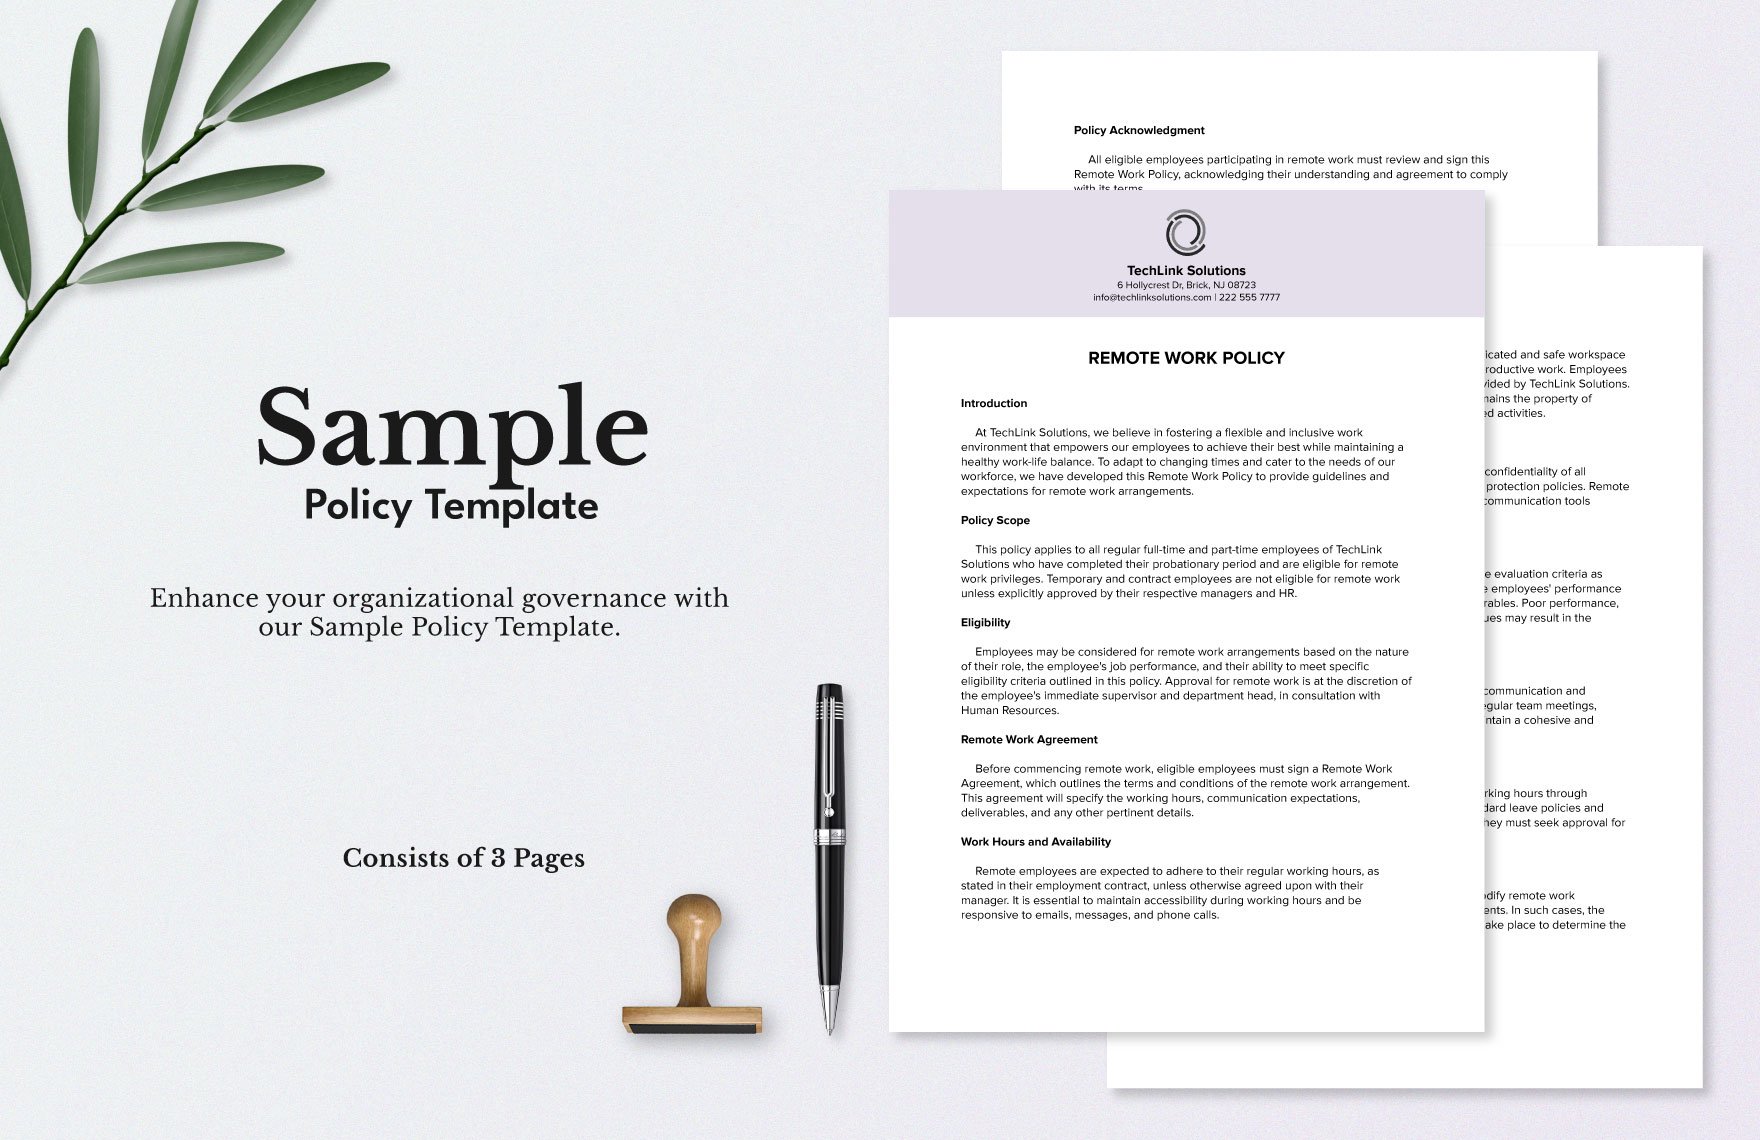 Sample Policy Template